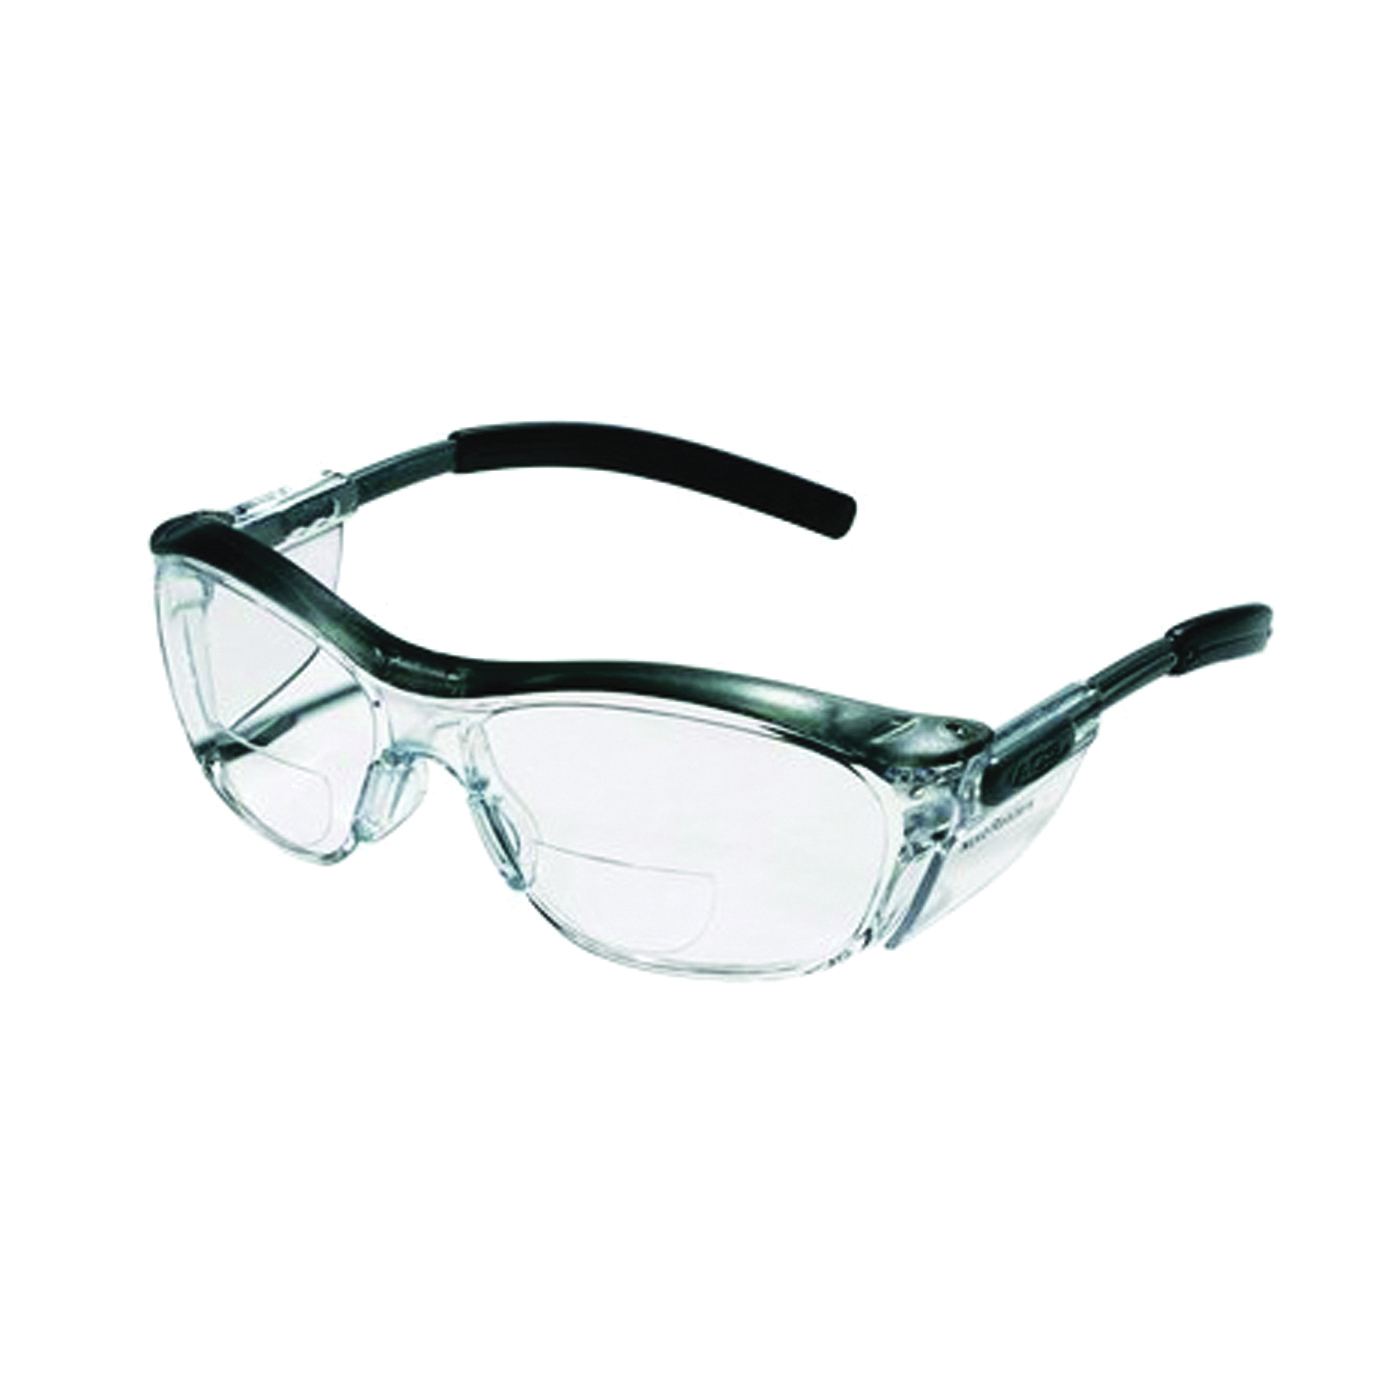 3 New TEKK SAFETY General Purpose Visitor Fit Over Glasses Goggles 47110-WV10 